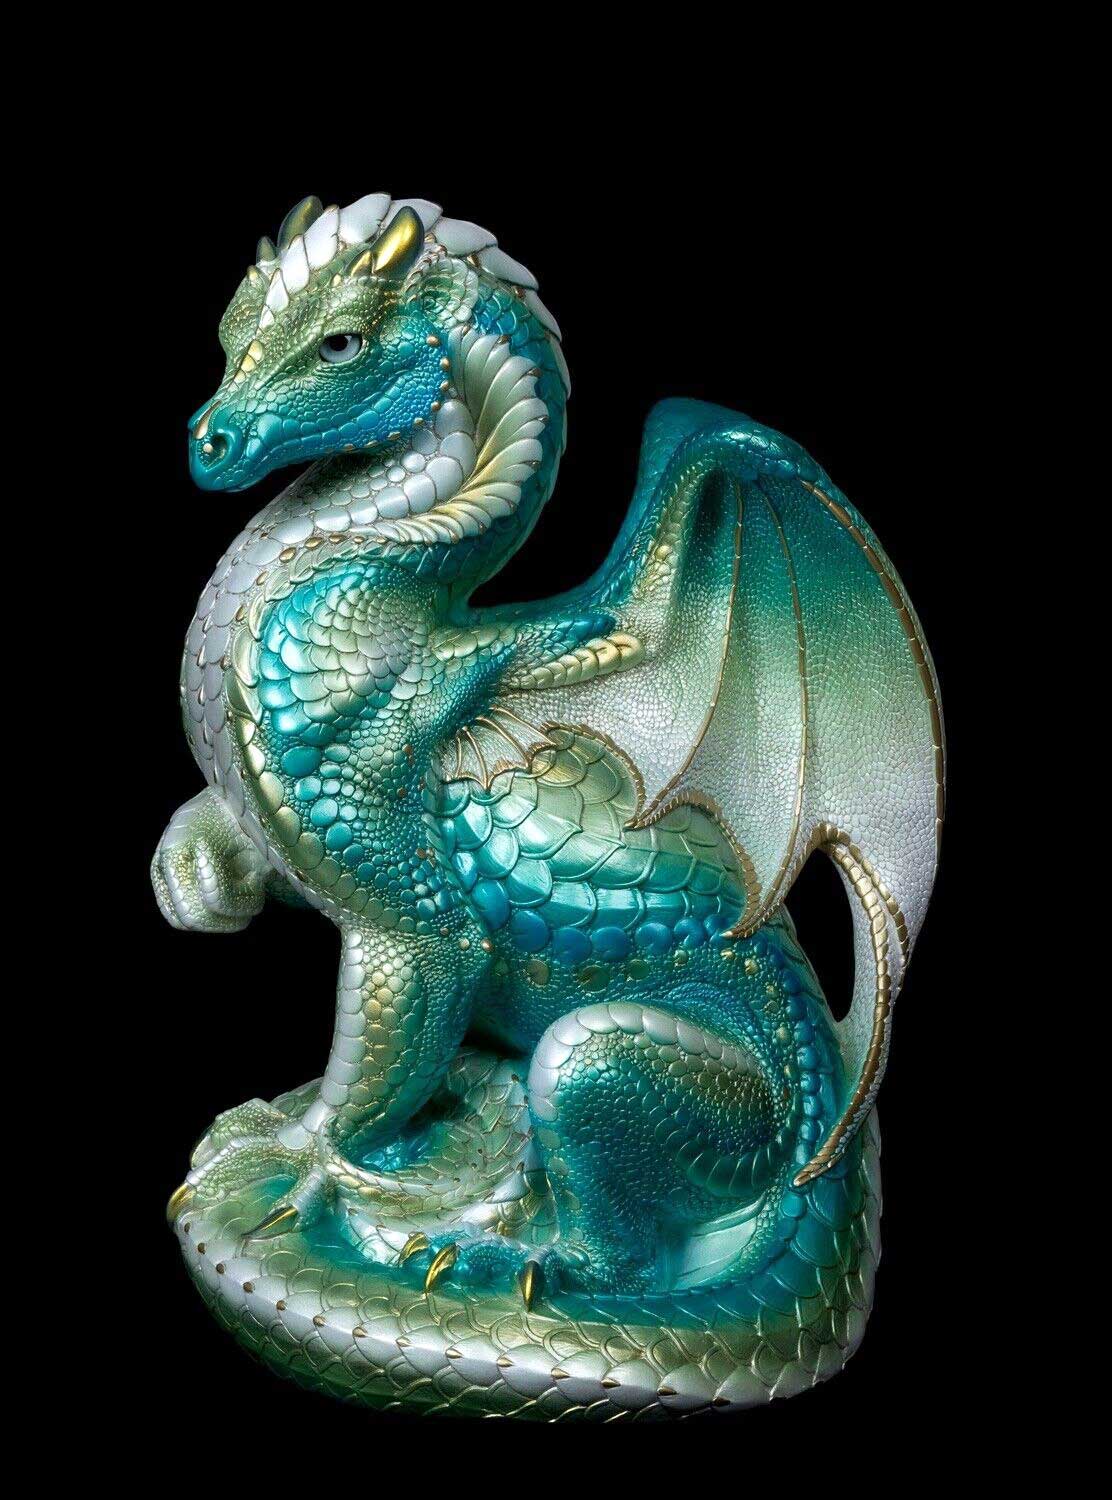 20230505-Seaglass-Secret-Keeper-Dragon-Test-Paint-1-by-Gina